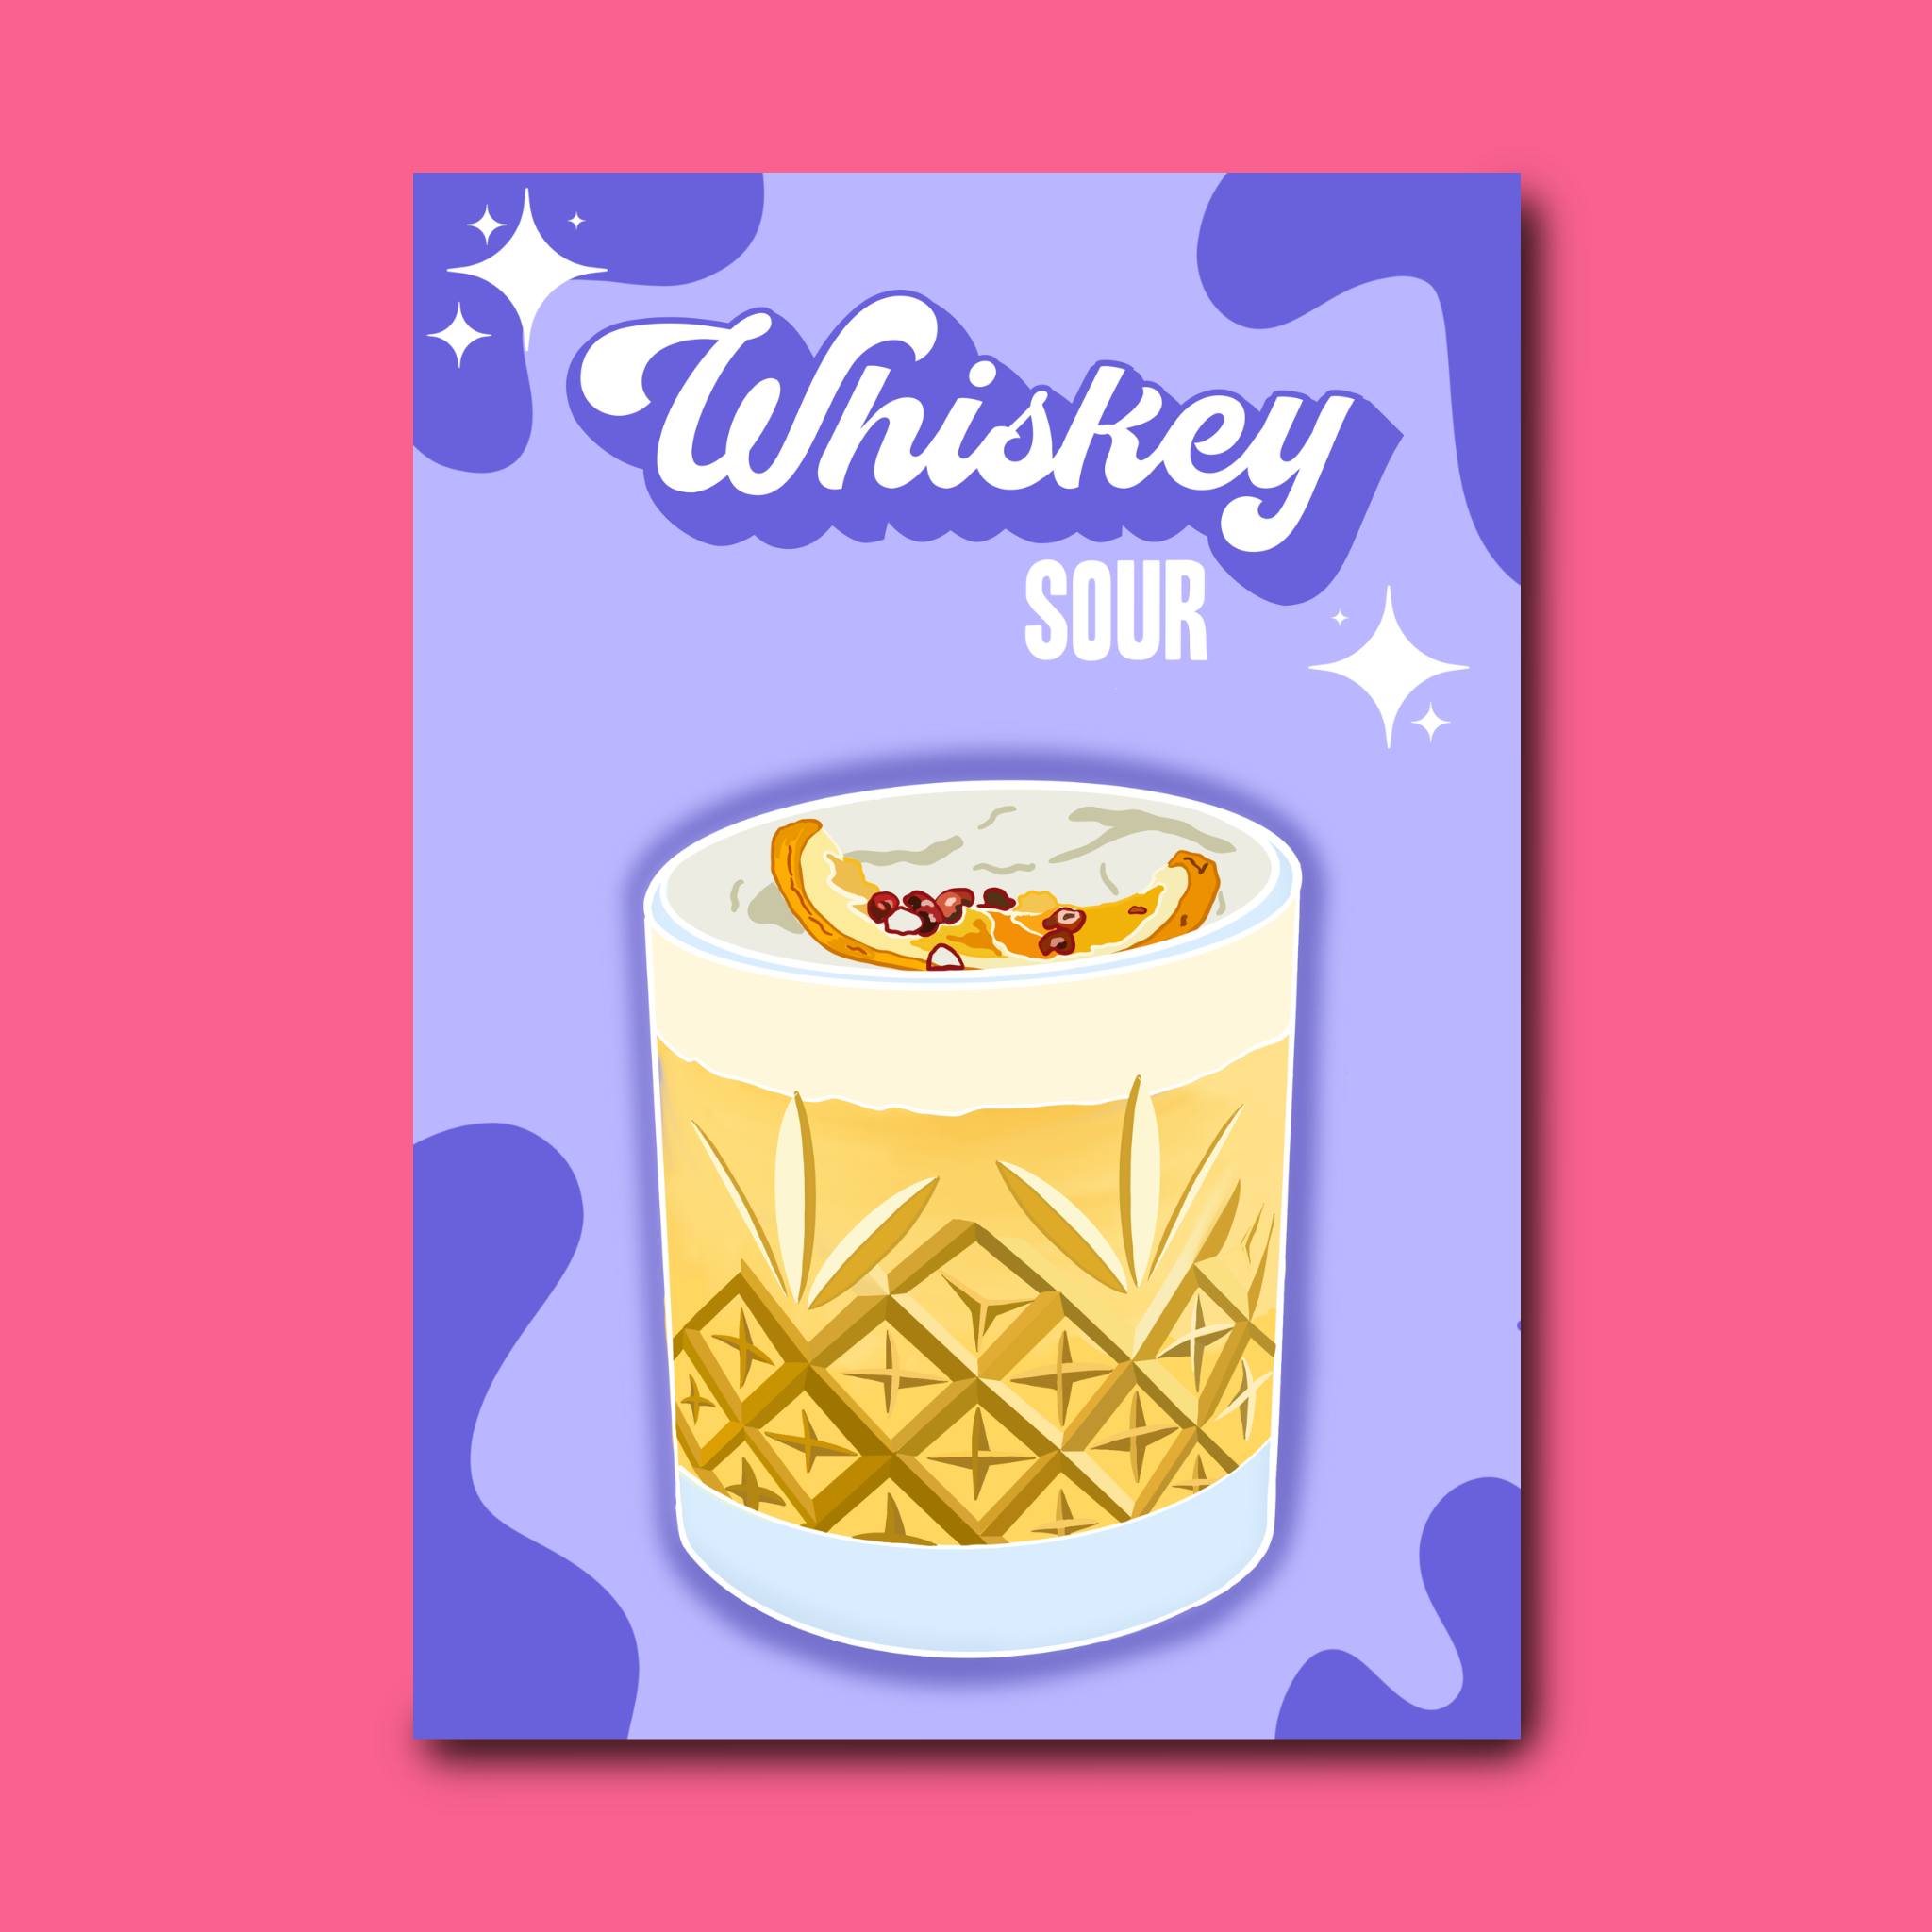 Whiskey sour Old stock